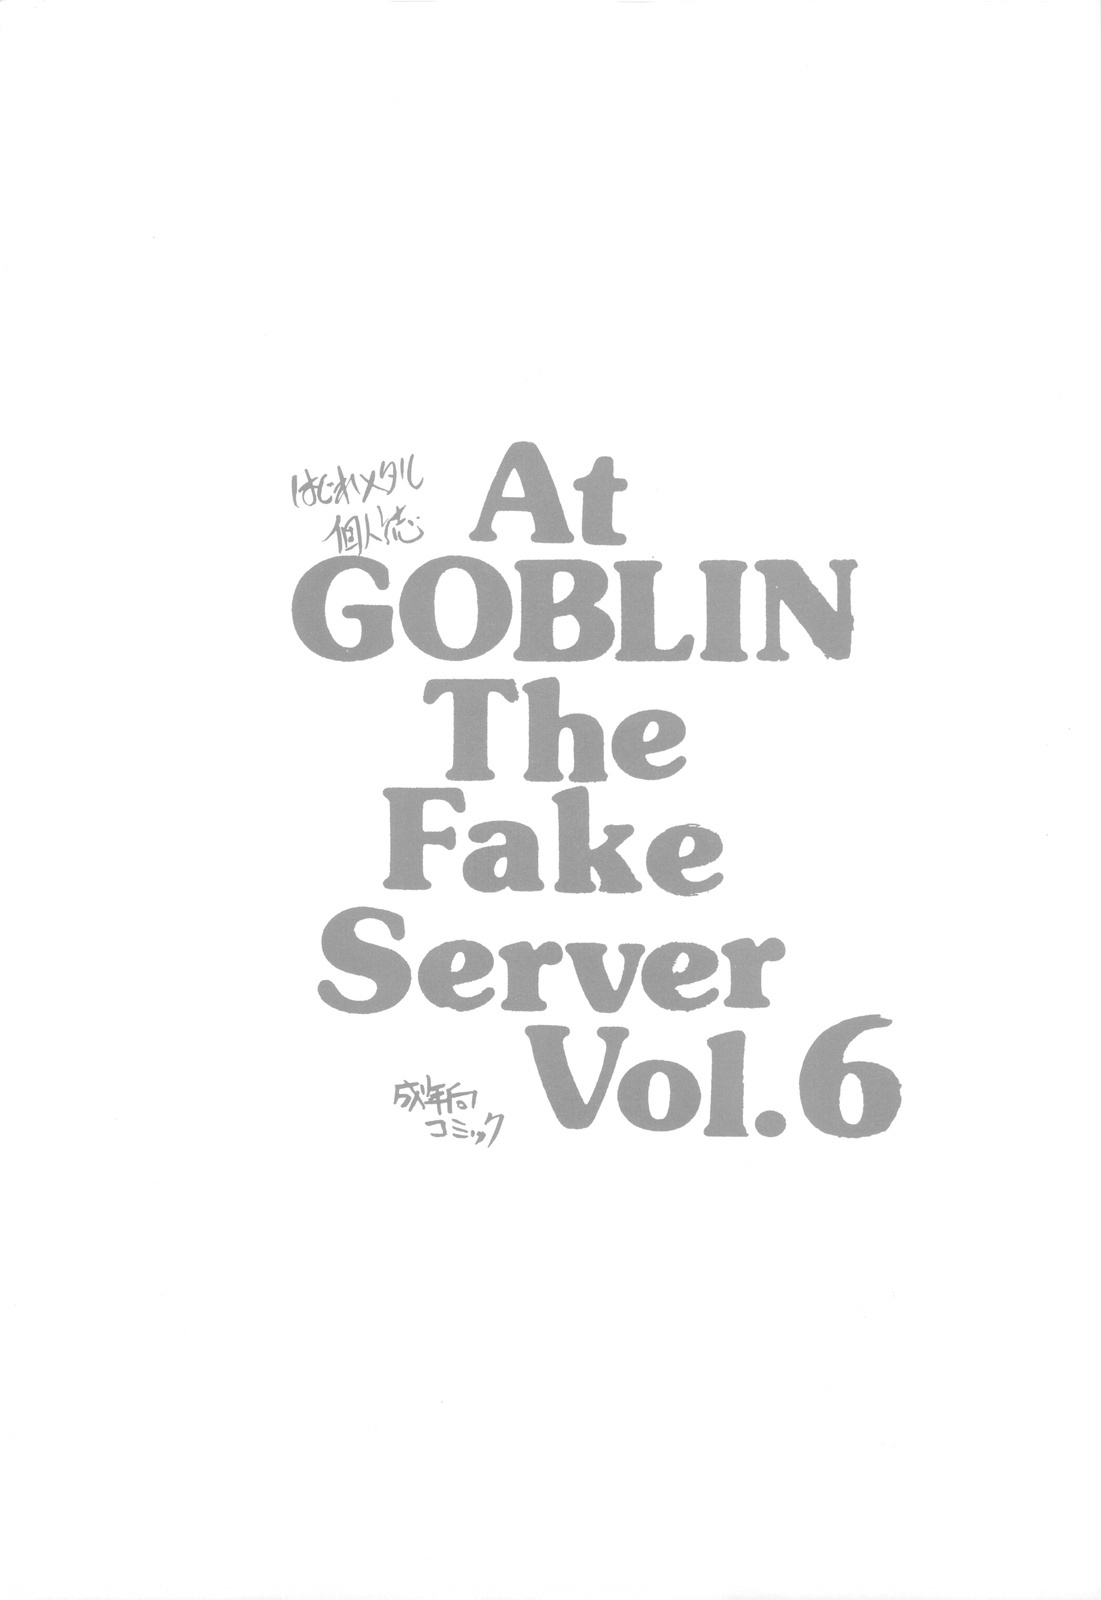 (COMIC1☆4) [ZINZIN] At GOBLIN The FakeServer Vol.6 (FF11) page 20 full